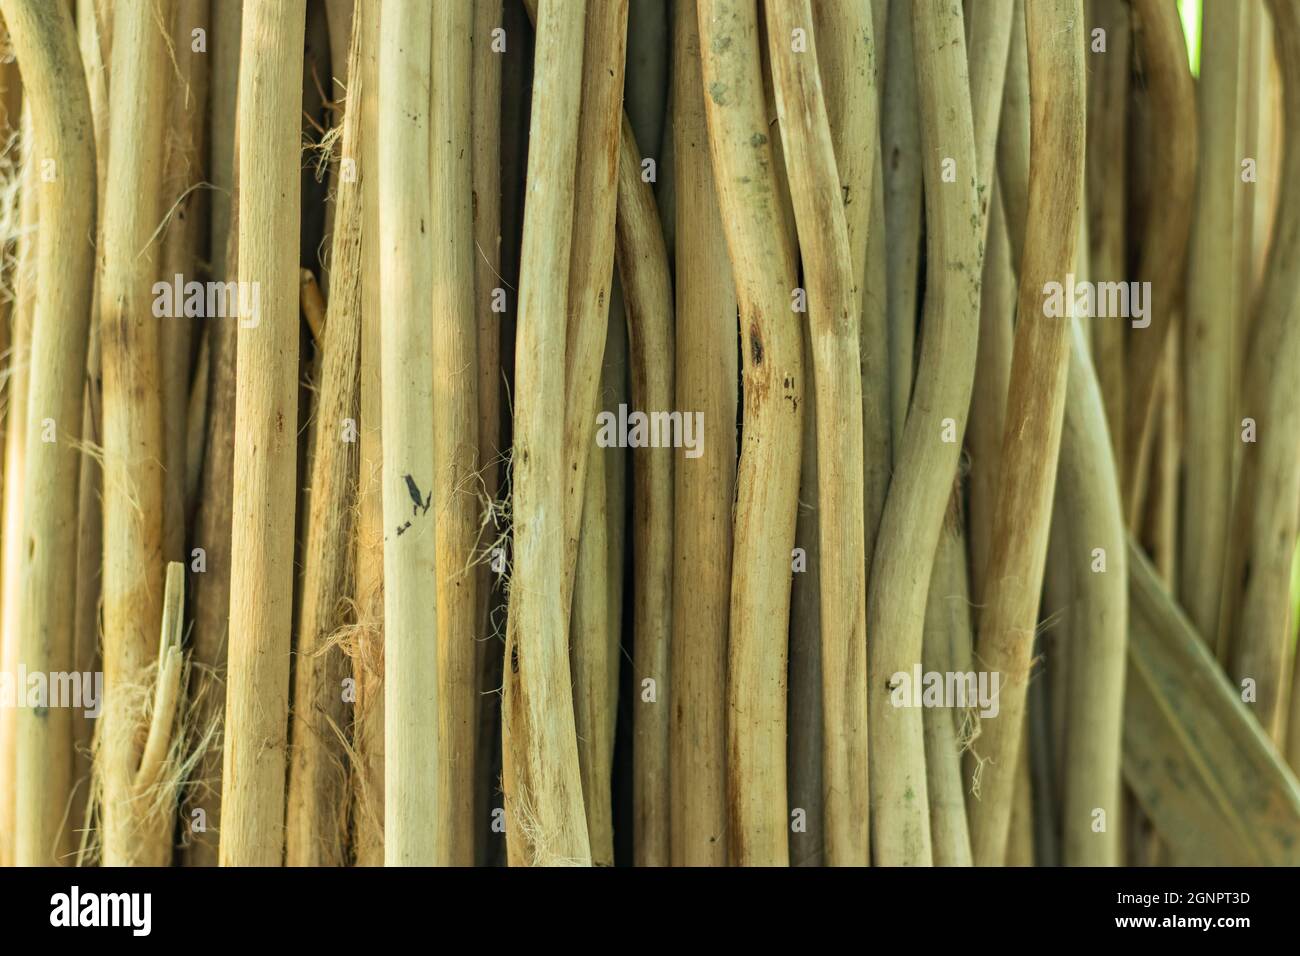 https://c8.alamy.com/comp/2GNPT3D/jute-stick-charcoal-dust-powder-also-commonly-known-as-jute-stick-carbon-and-jute-sticks-are-preferred-over-other-raw-materials-like-bamboo-2GNPT3D.jpg